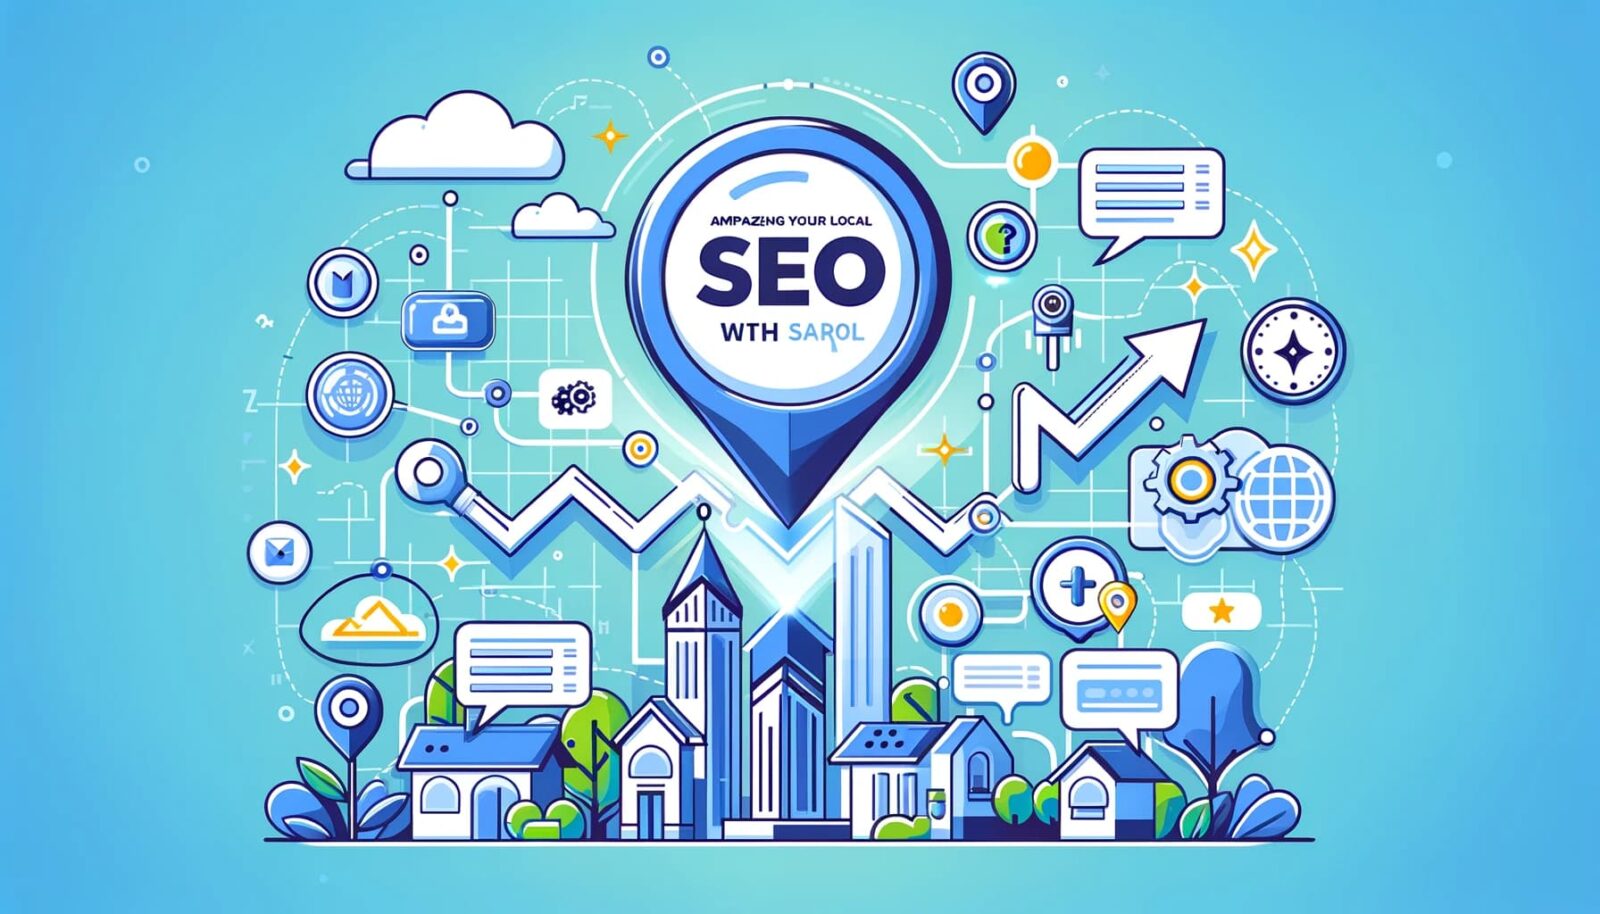 “7 Tips for Amplifying Your Local SEO with ChatGPT”.